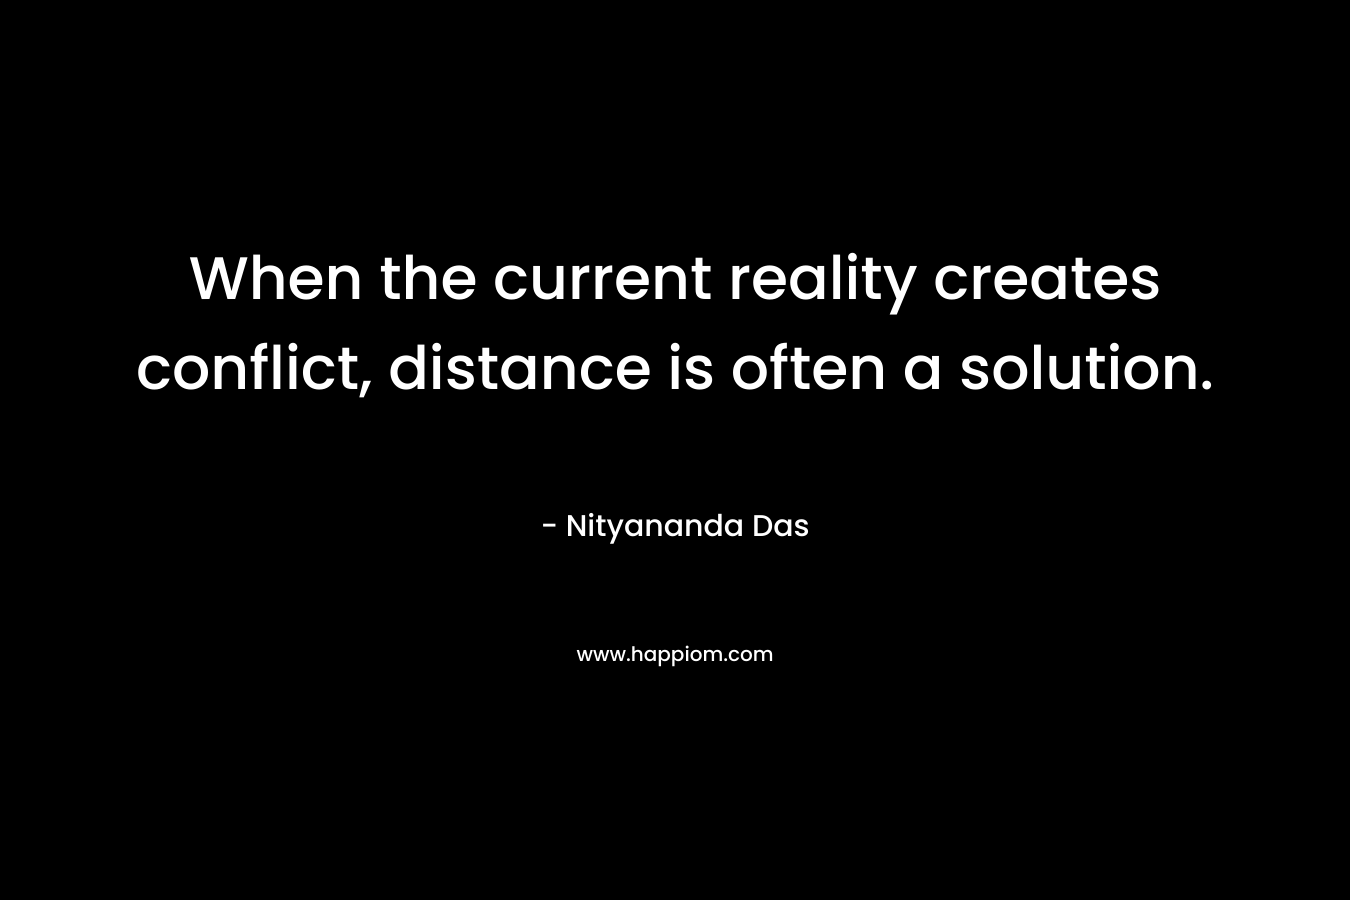 When the current reality creates conflict, distance is often a solution. – Nityananda Das